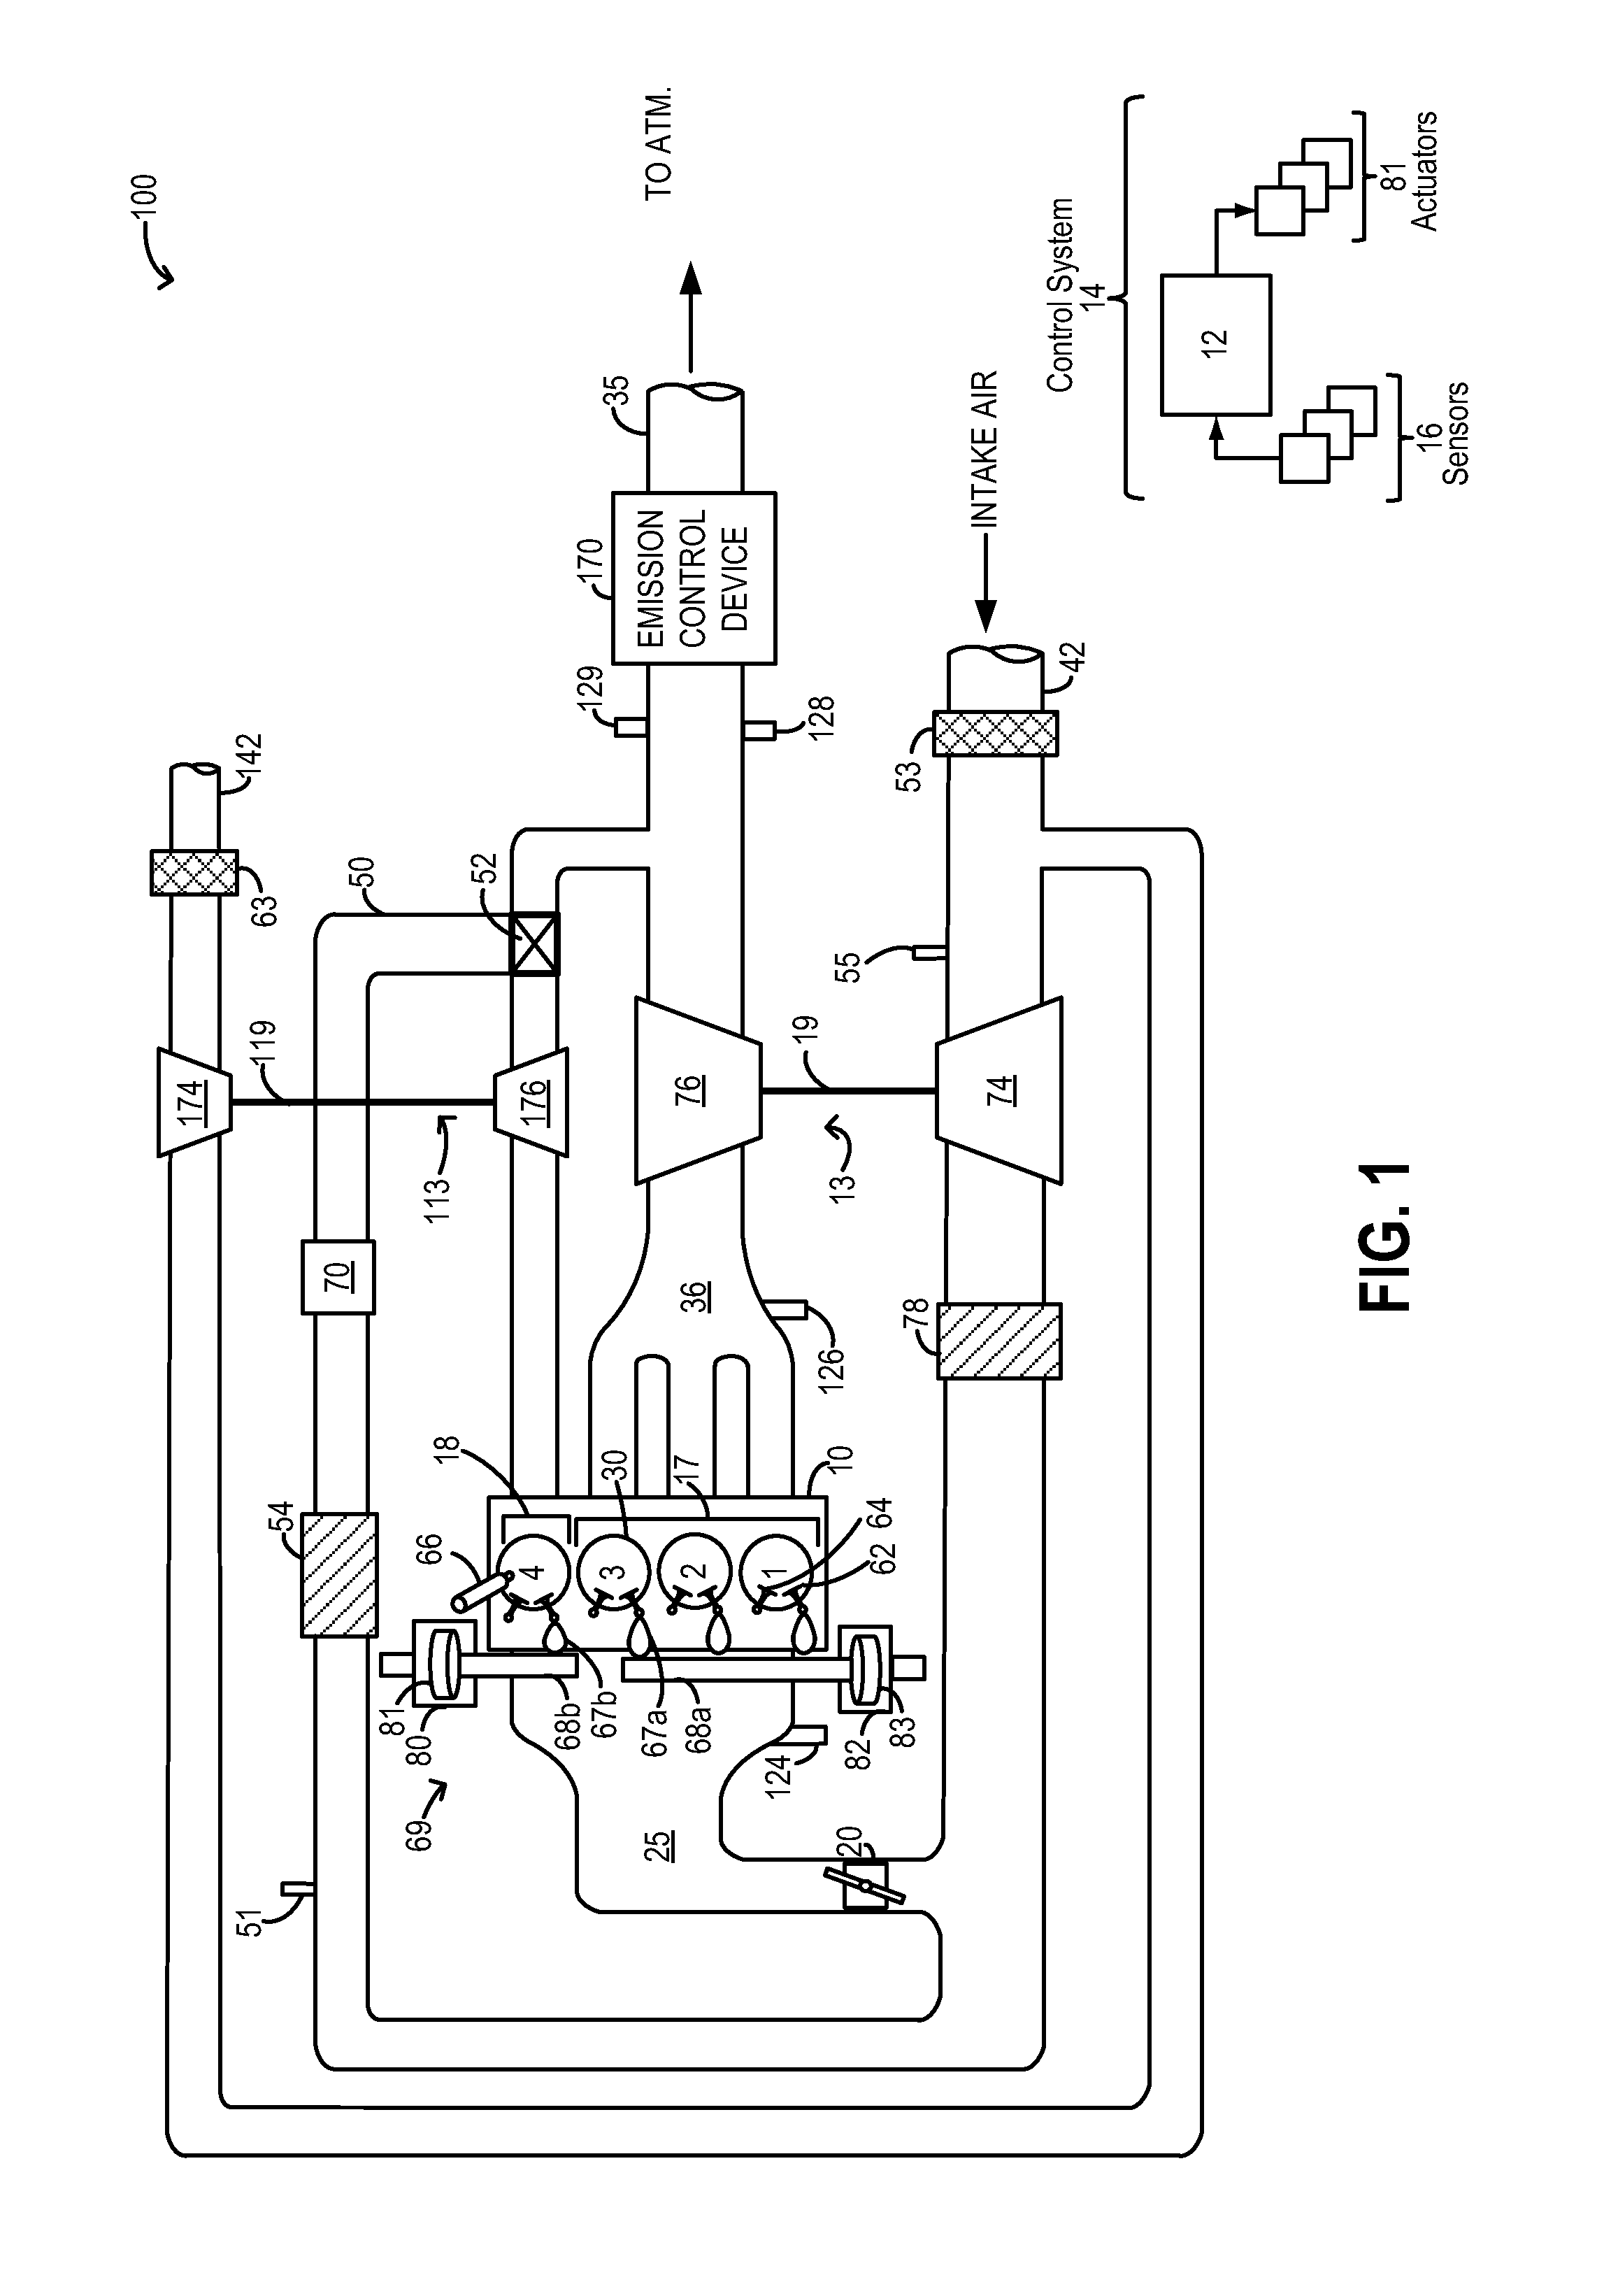 Systems and methods for boost control